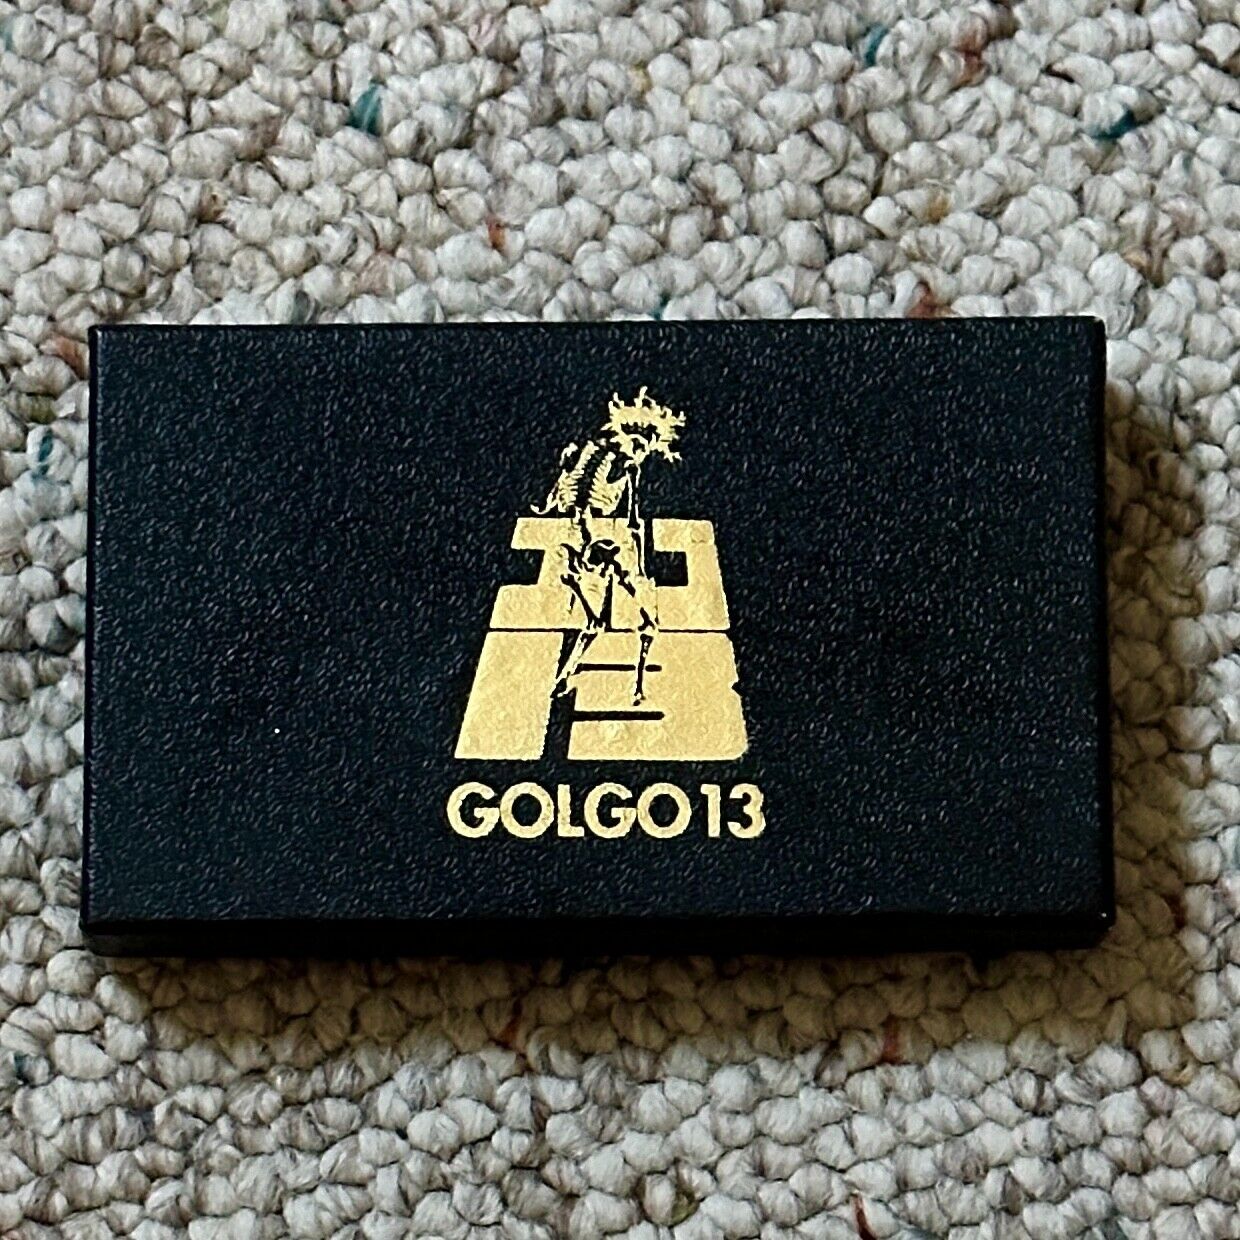 Golgo 13 Coin Set, Two Coins, Complete in Box, Japanese Exclusive EXTREMELY RARE